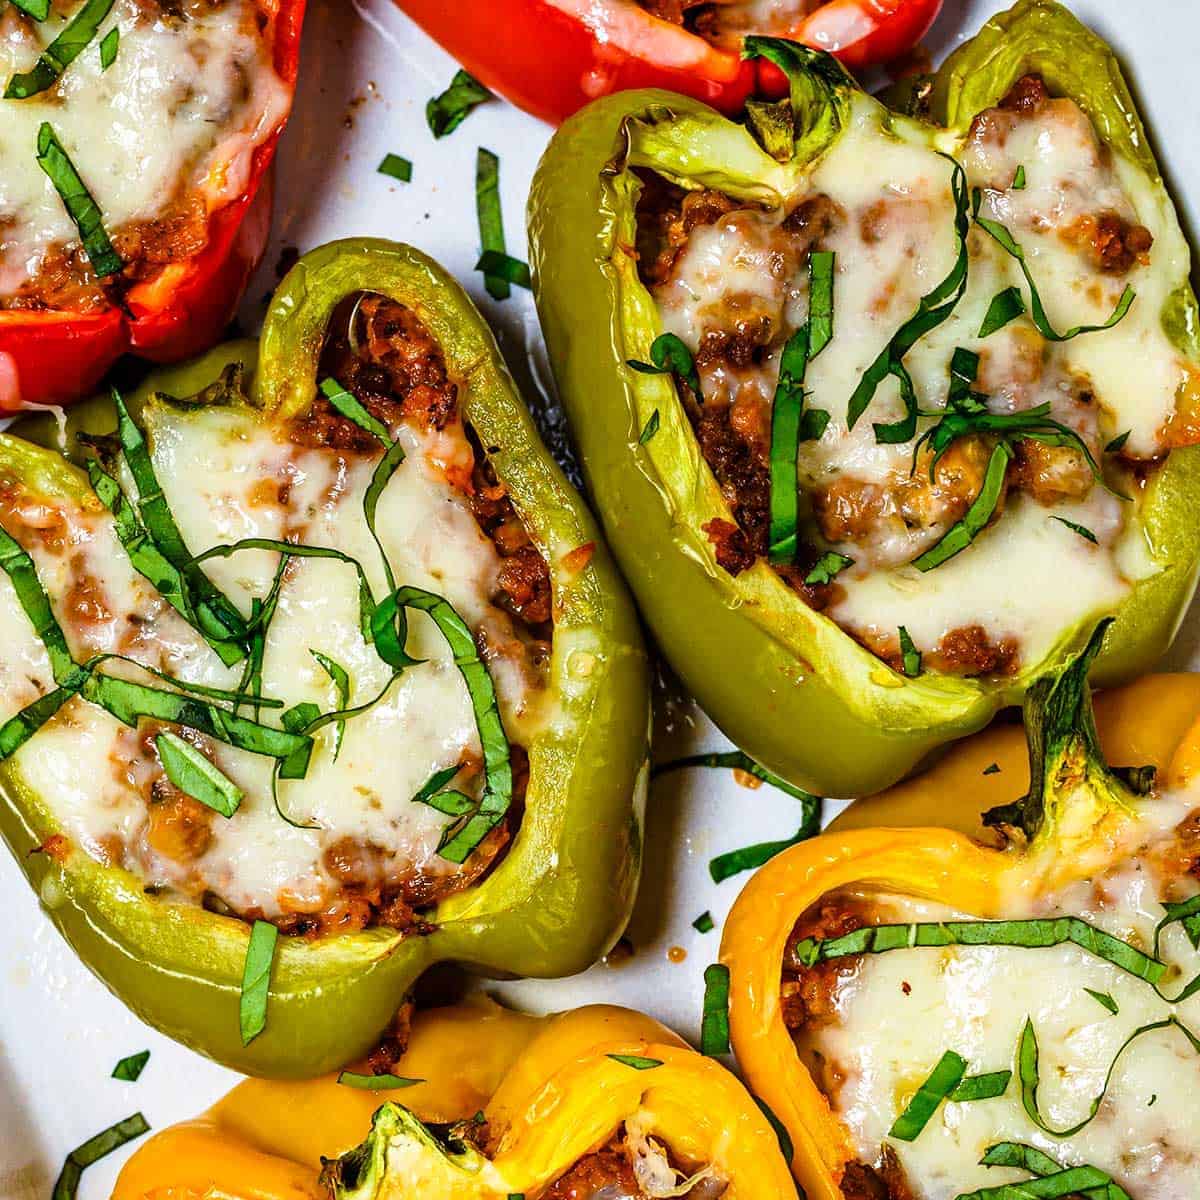 Six stuffed bell peppers up close